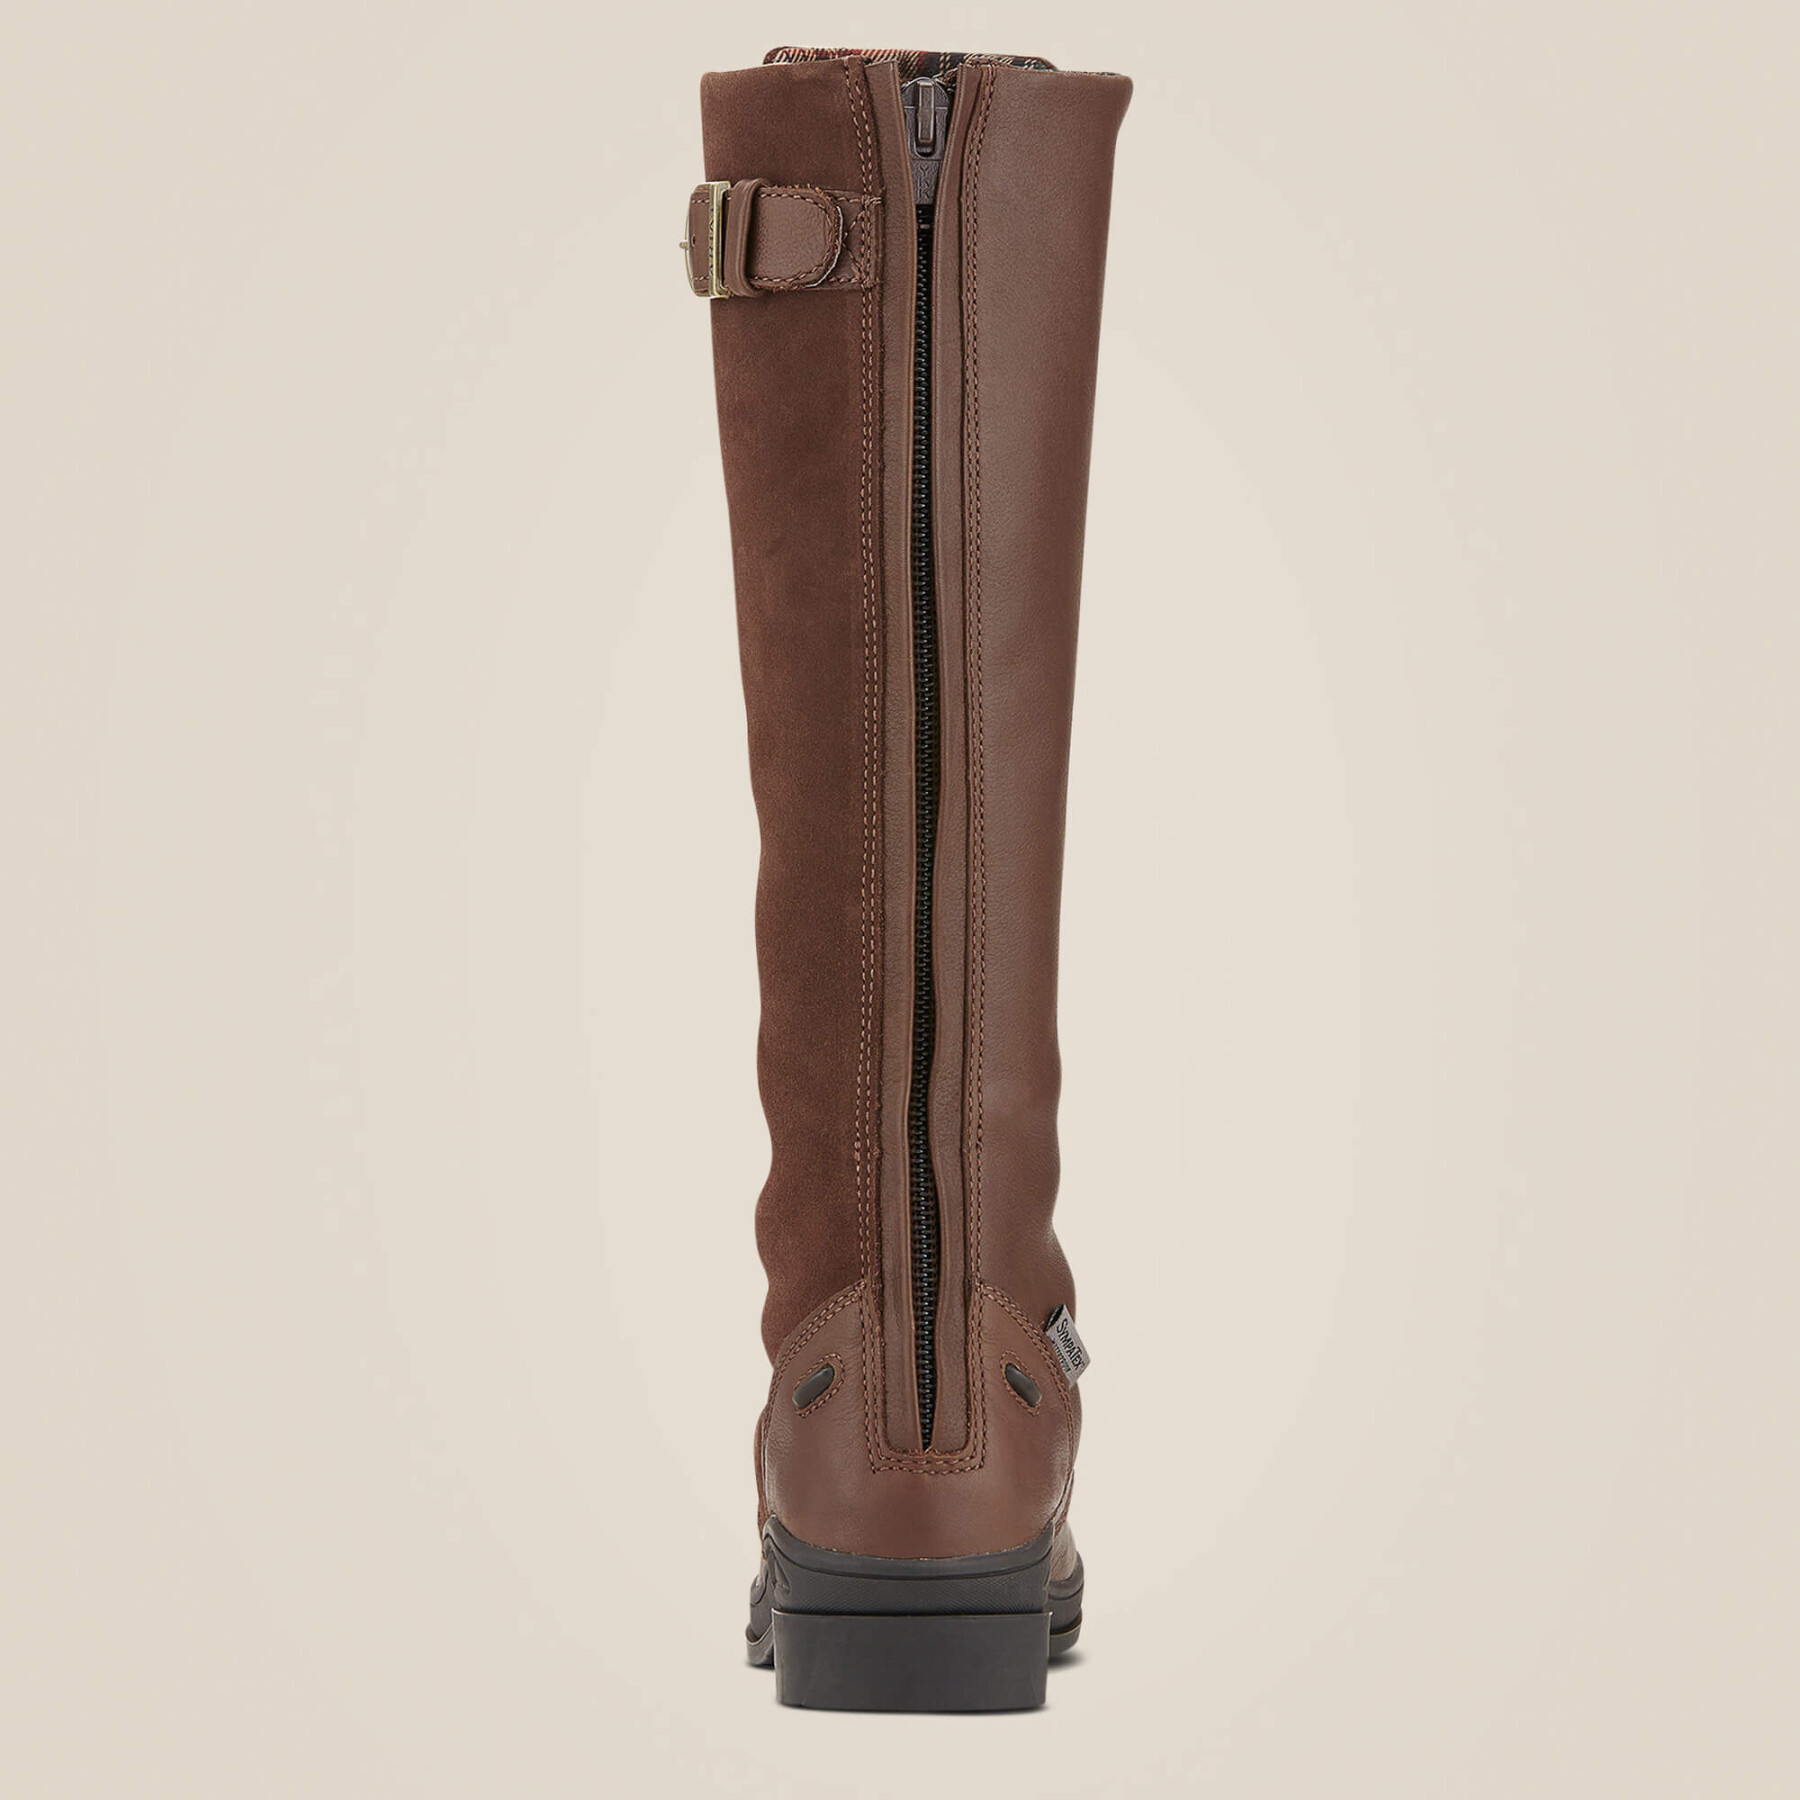 Women's waterproof riding boots Ariat Coniston